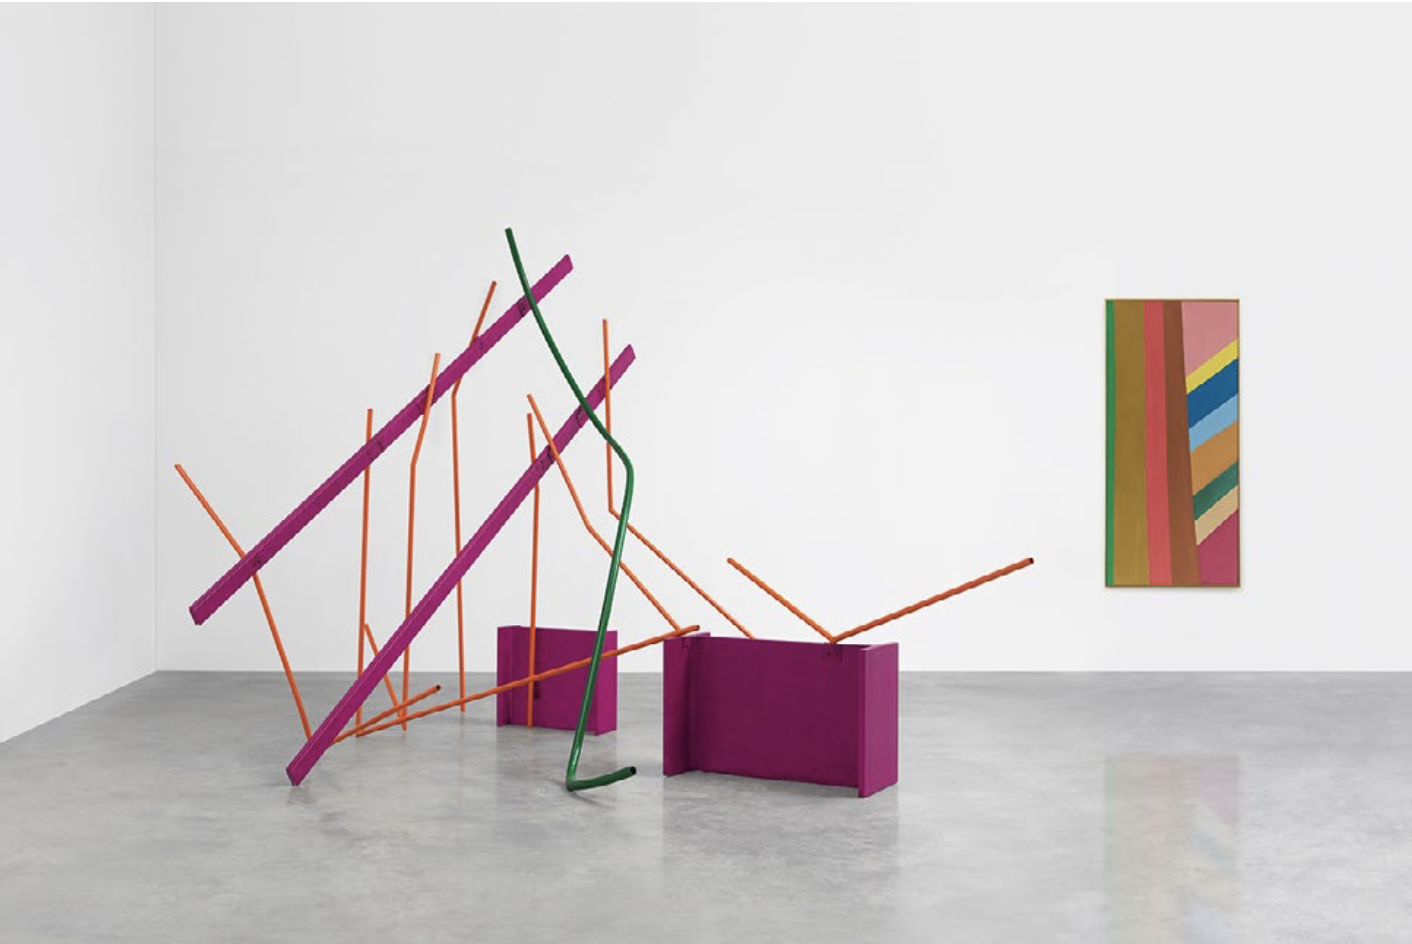 The Wick - Anthony Caro, Month of May, 1963 and Jack Bush, Brown Pole, 1967